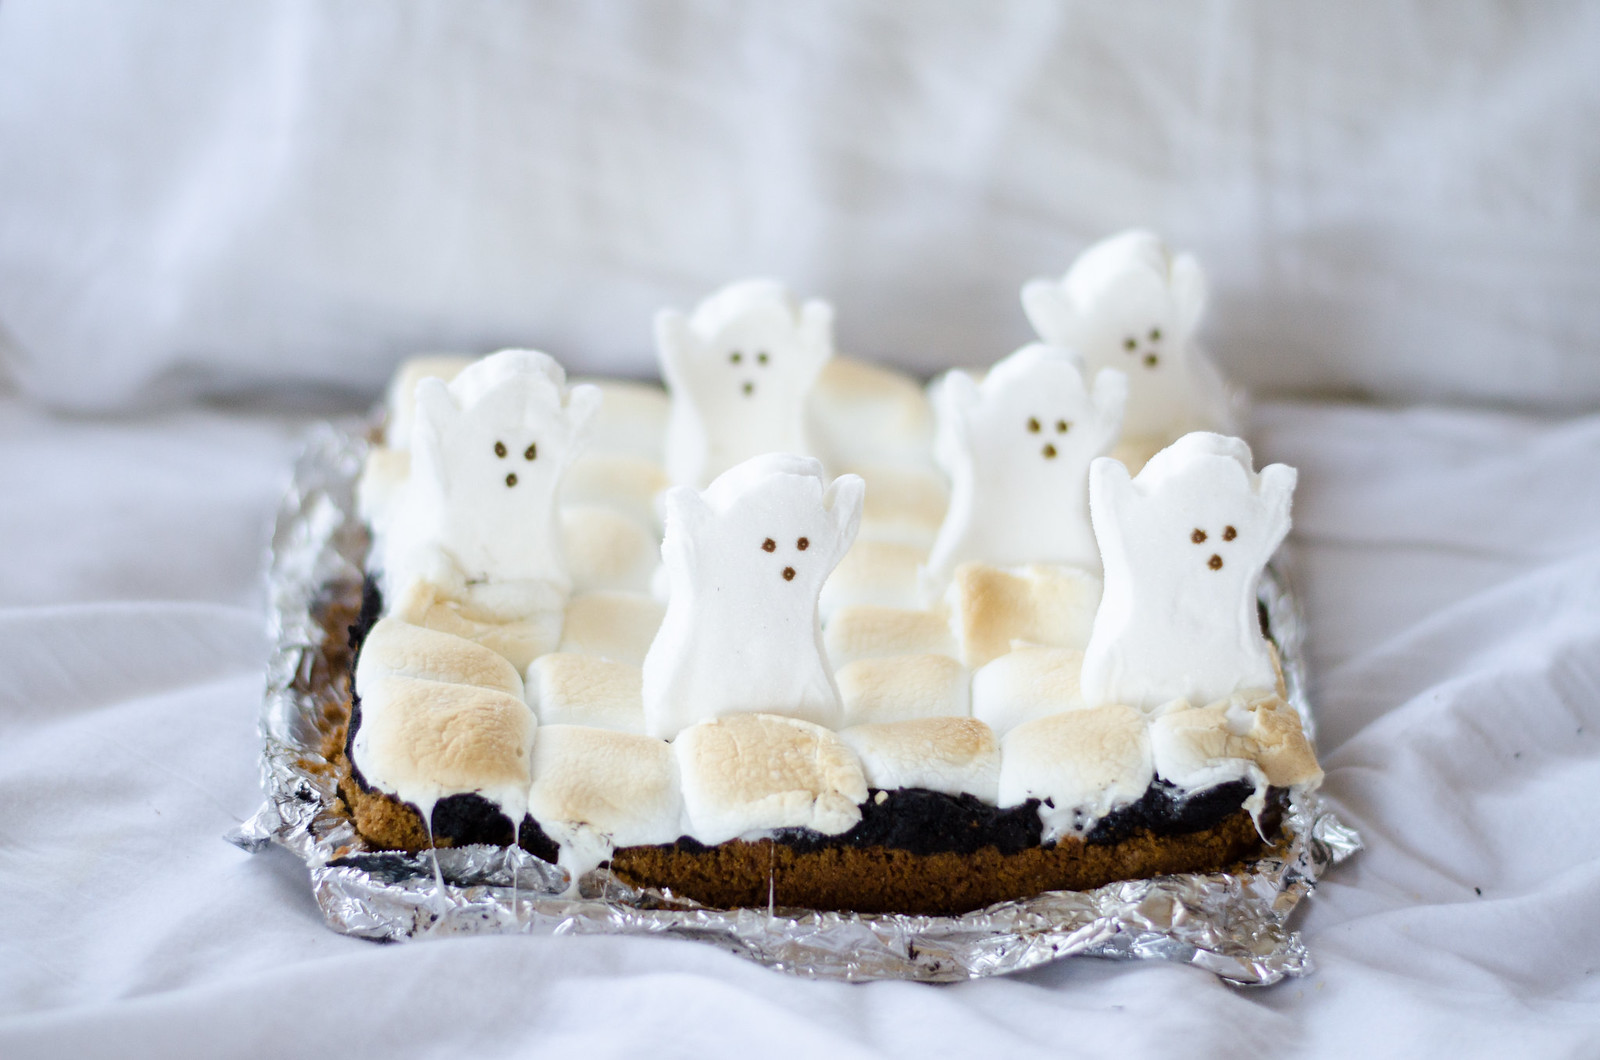 Ghost S'mores Brownie on juliettelaura.blogspot.com